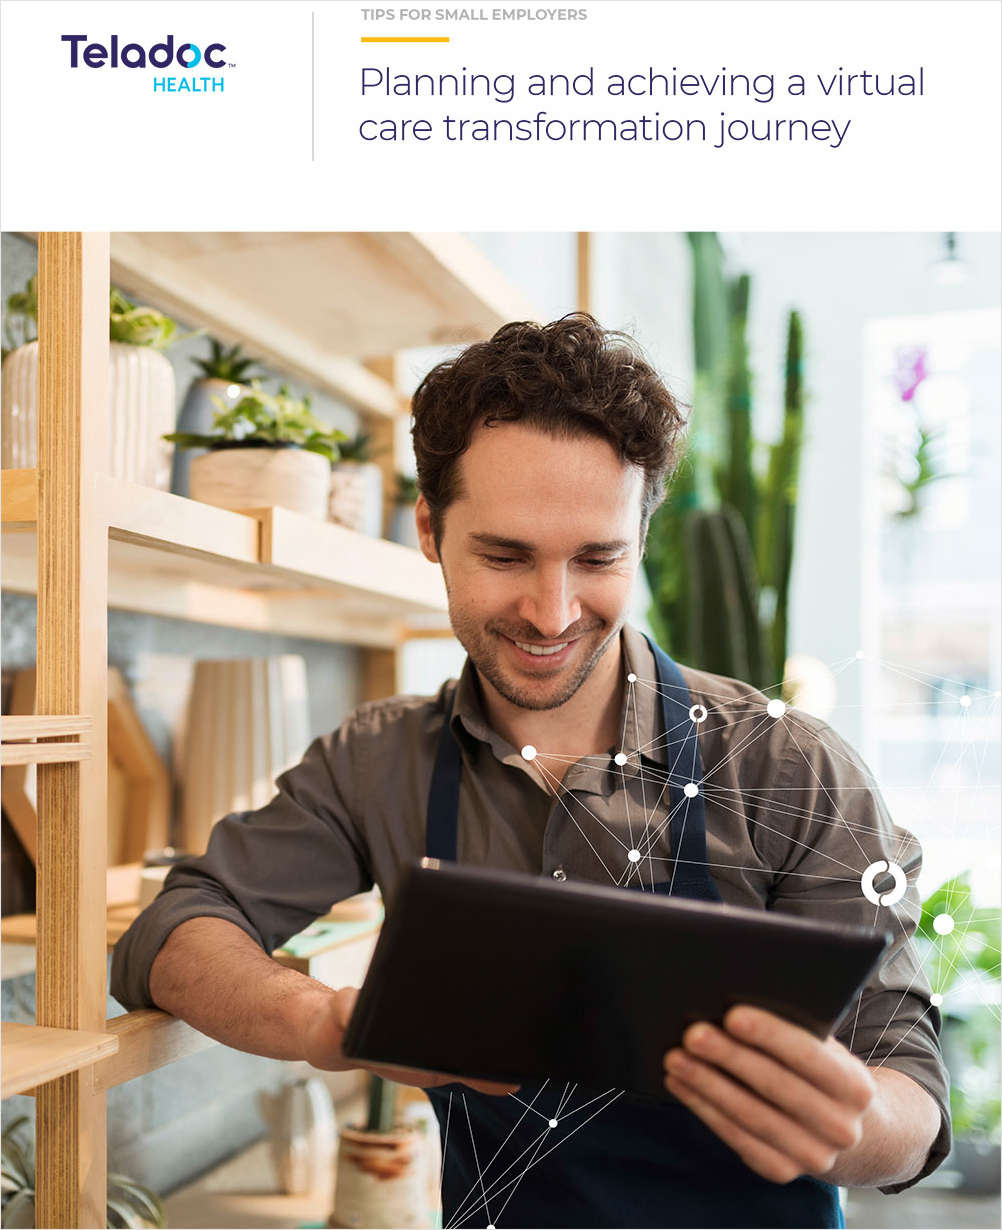 Tips for Your Small Employer Clients to Plan & Achieve a Digital Care Transformation Journey